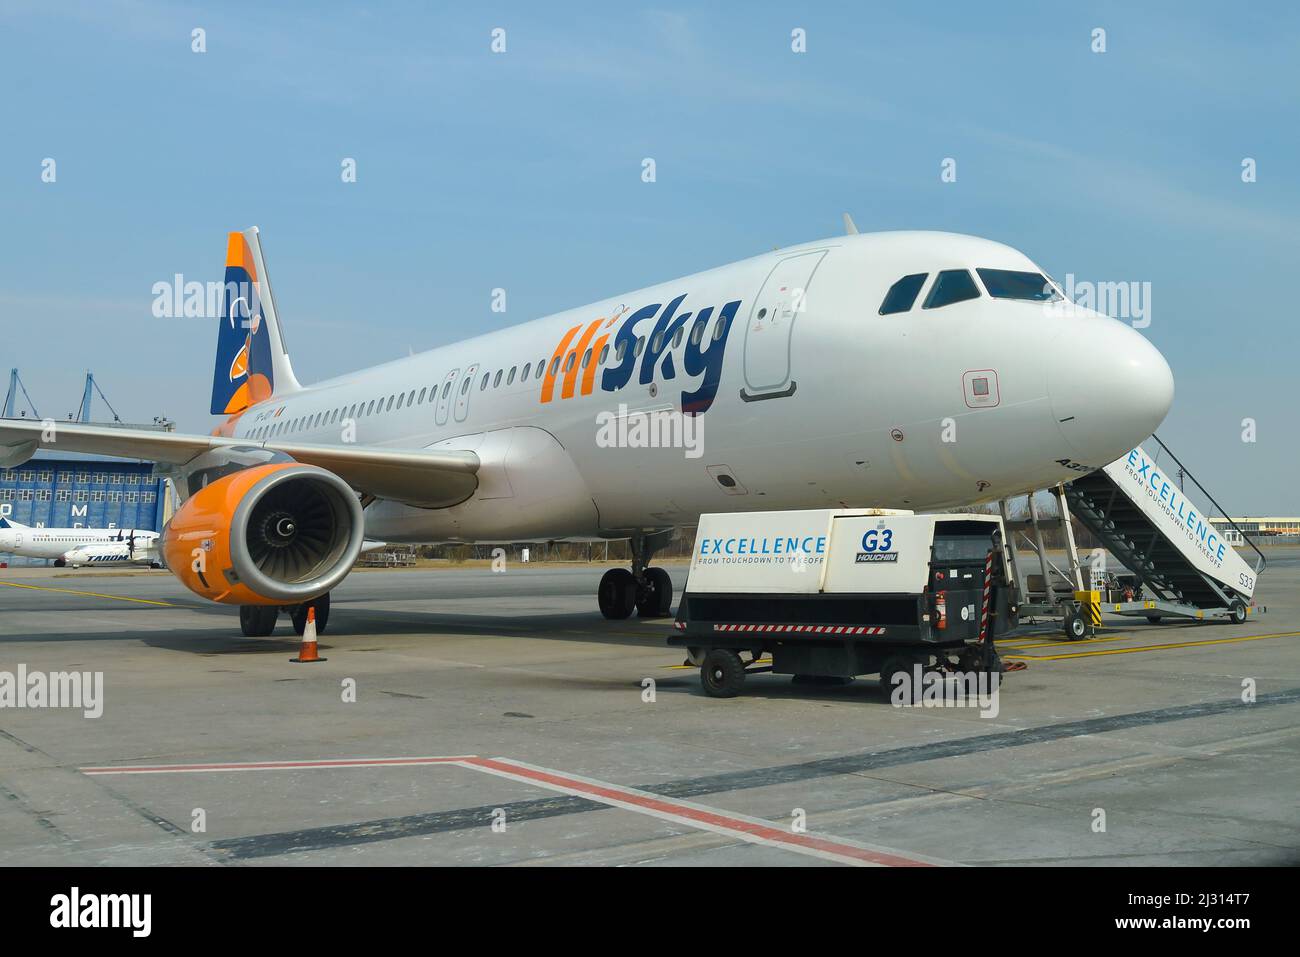 HiSky Airbus A320 aircraft. Hi Sky is an airline from Moldova. Airplane A320 of moldovan HiSky airlines. Stock Photo